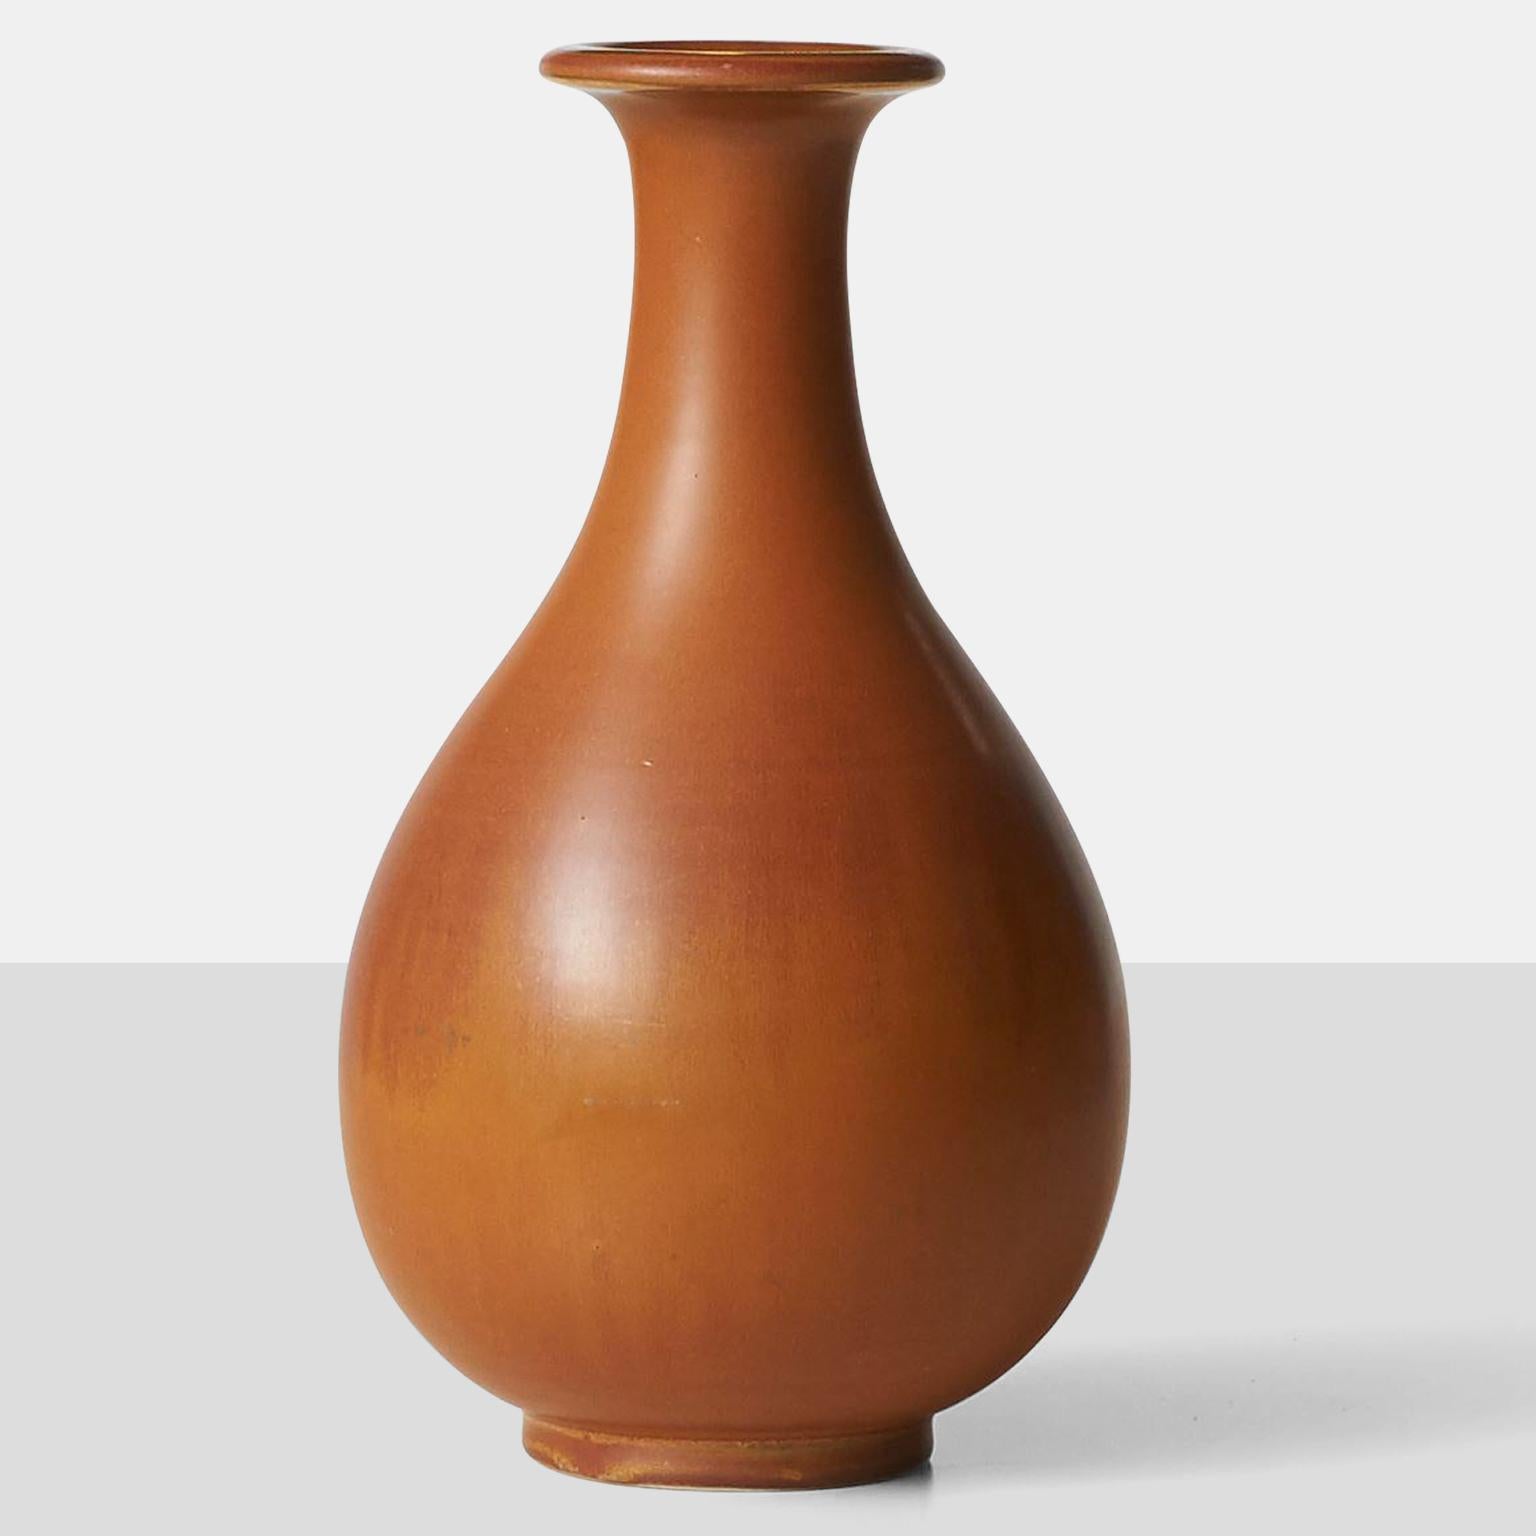 A Gunnar Nylund vase in hare's fur glaze of tans and cinnamon. Crafted by Rörstrand and inscribed {R Sweden GN}.